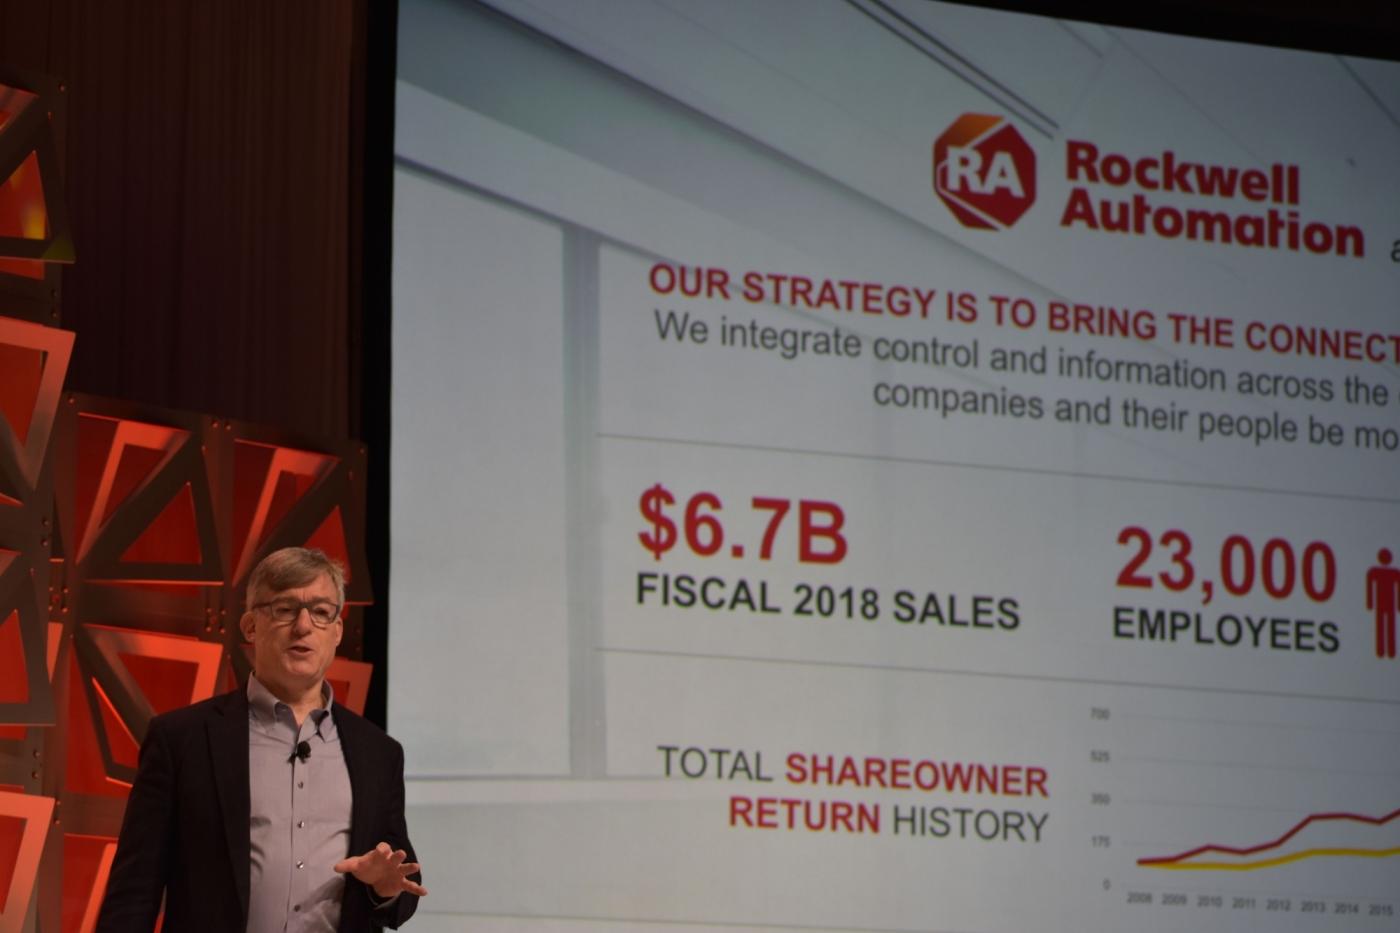 Rockwell Automation Chairman and CEO Blake Moret at the opening the "2018 Automation Perspectives" event in Philadelphia on Nov. 13, 2018. by .